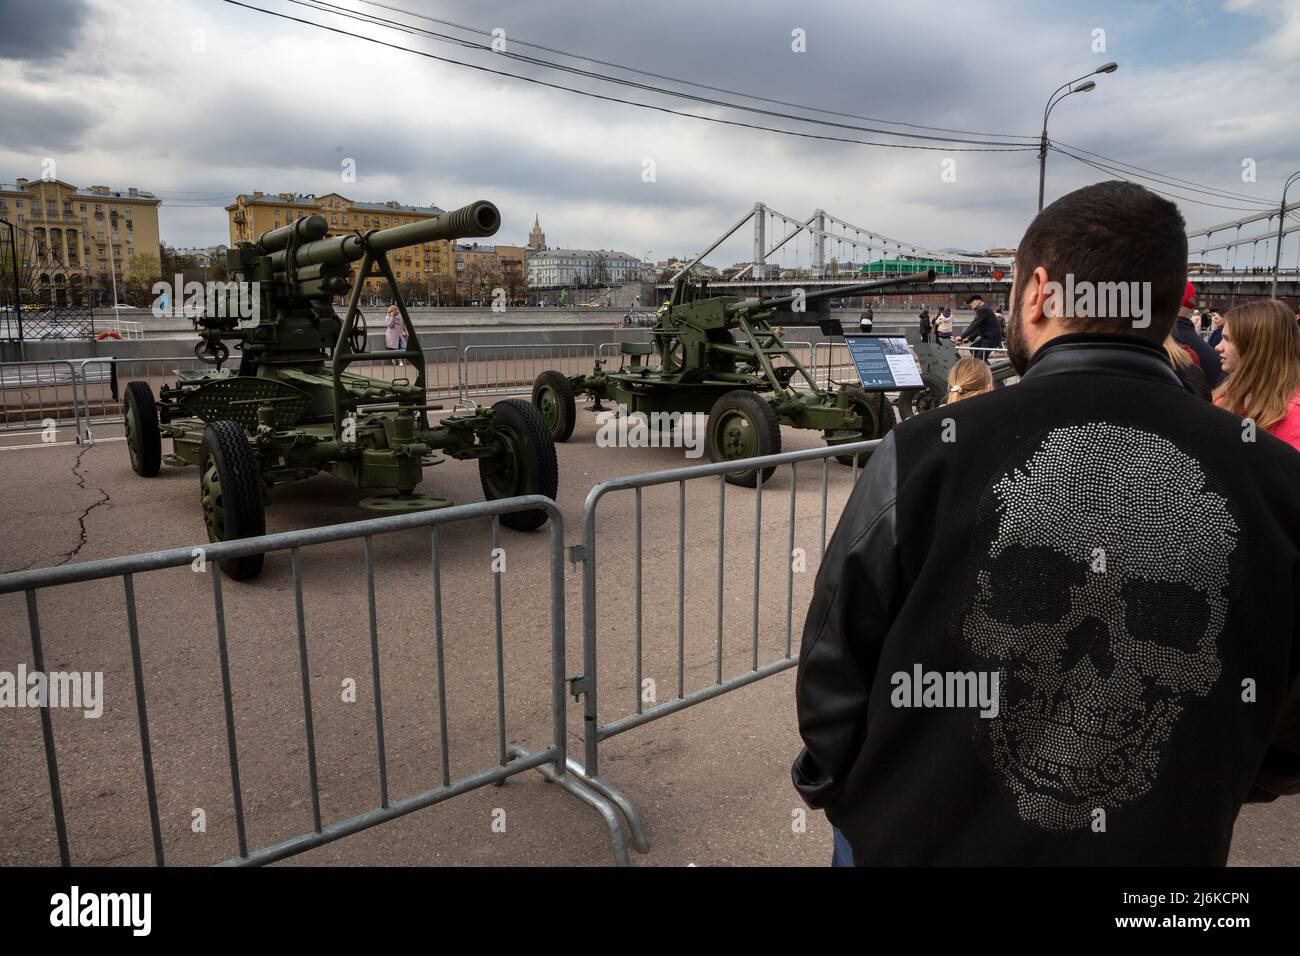 Moscow, Russia. 2nd May, 2022 People watch an exhibition of historical military vehicles and cannons of Soviet Union from the World War II times in Gorky Park in Moscow, Russia Stock Photo